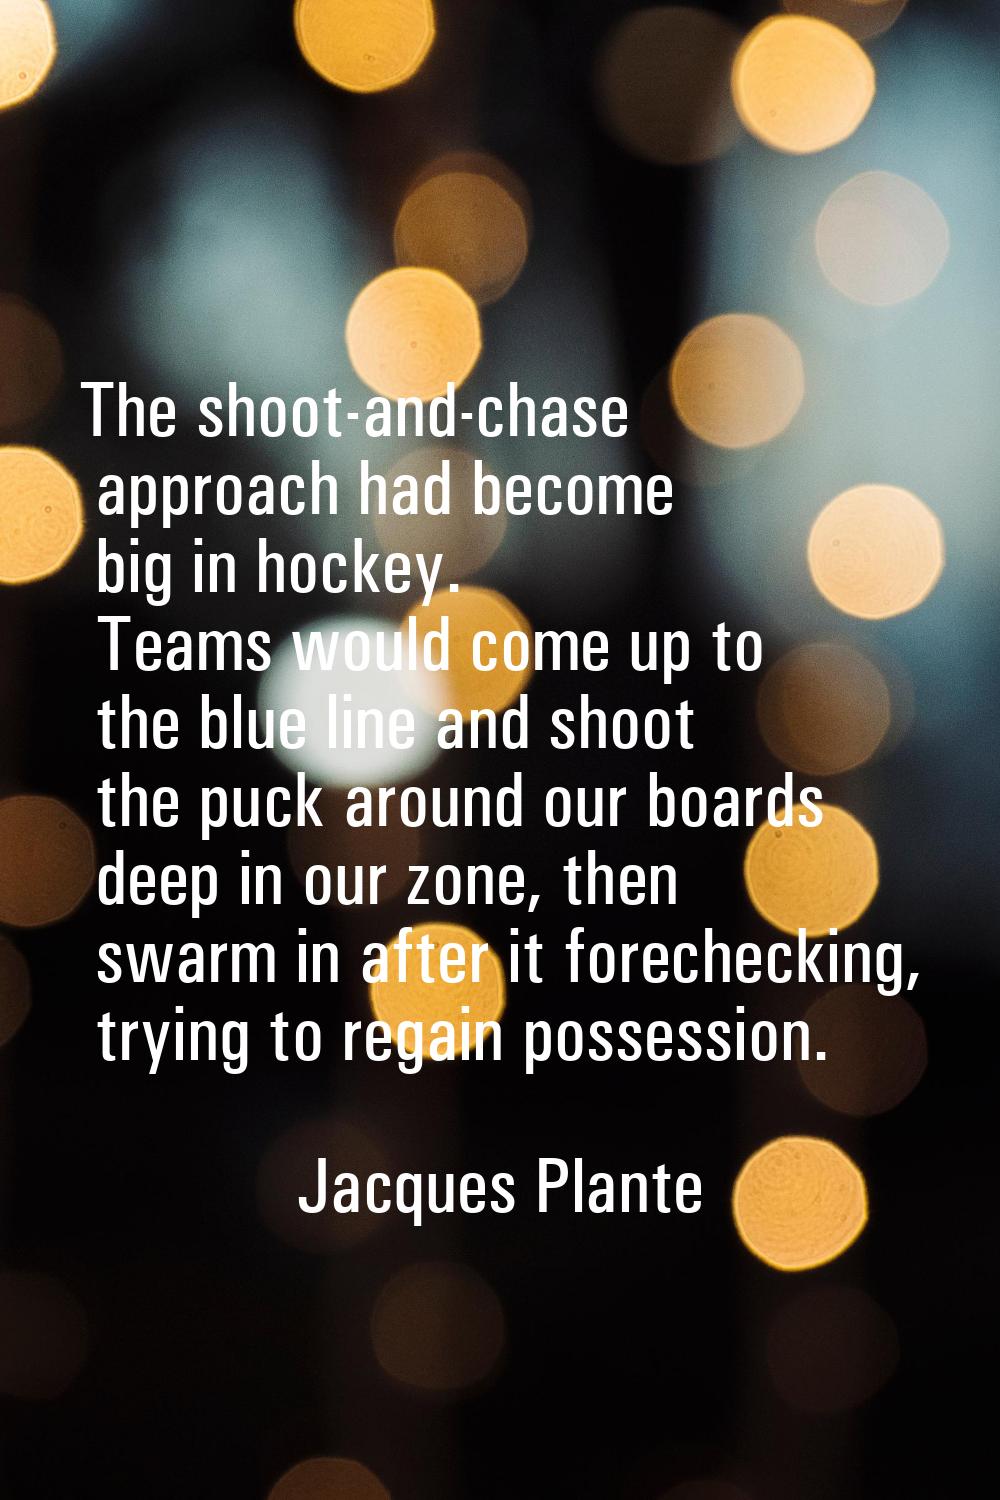 The shoot-and-chase approach had become big in hockey. Teams would come up to the blue line and sho